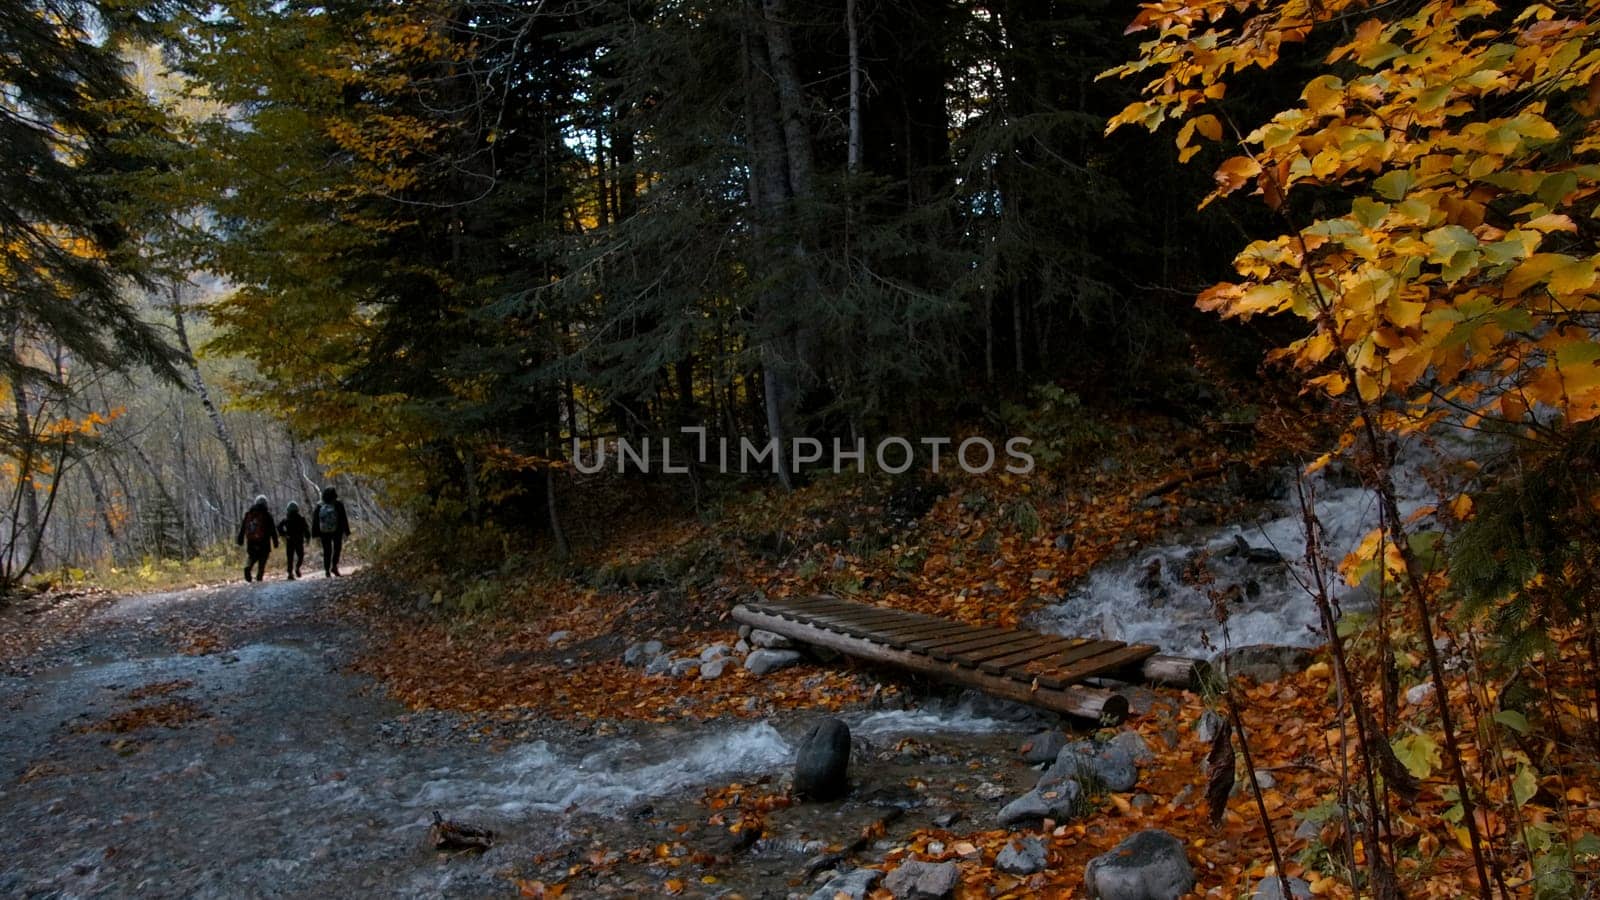 Small group of hikers walking by trail in autumn forest. Creative. Wet wood with yellow leaves and mountain stream